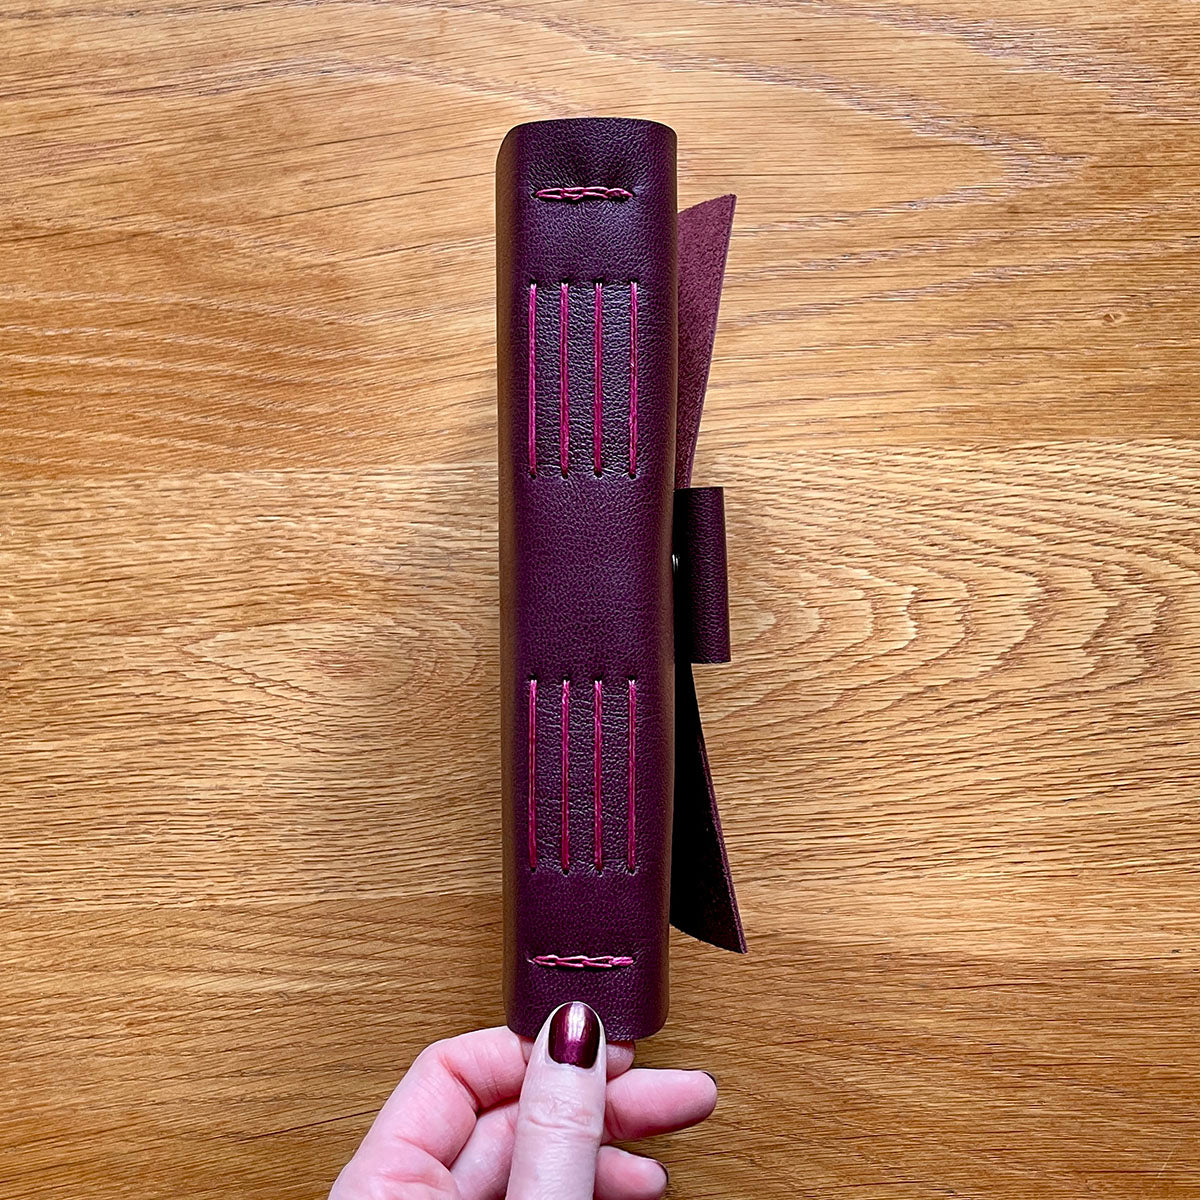 Leather Journal bound by hand in Maroon and Magenta, showing exposed spine Longstitch with Linkstitch binding